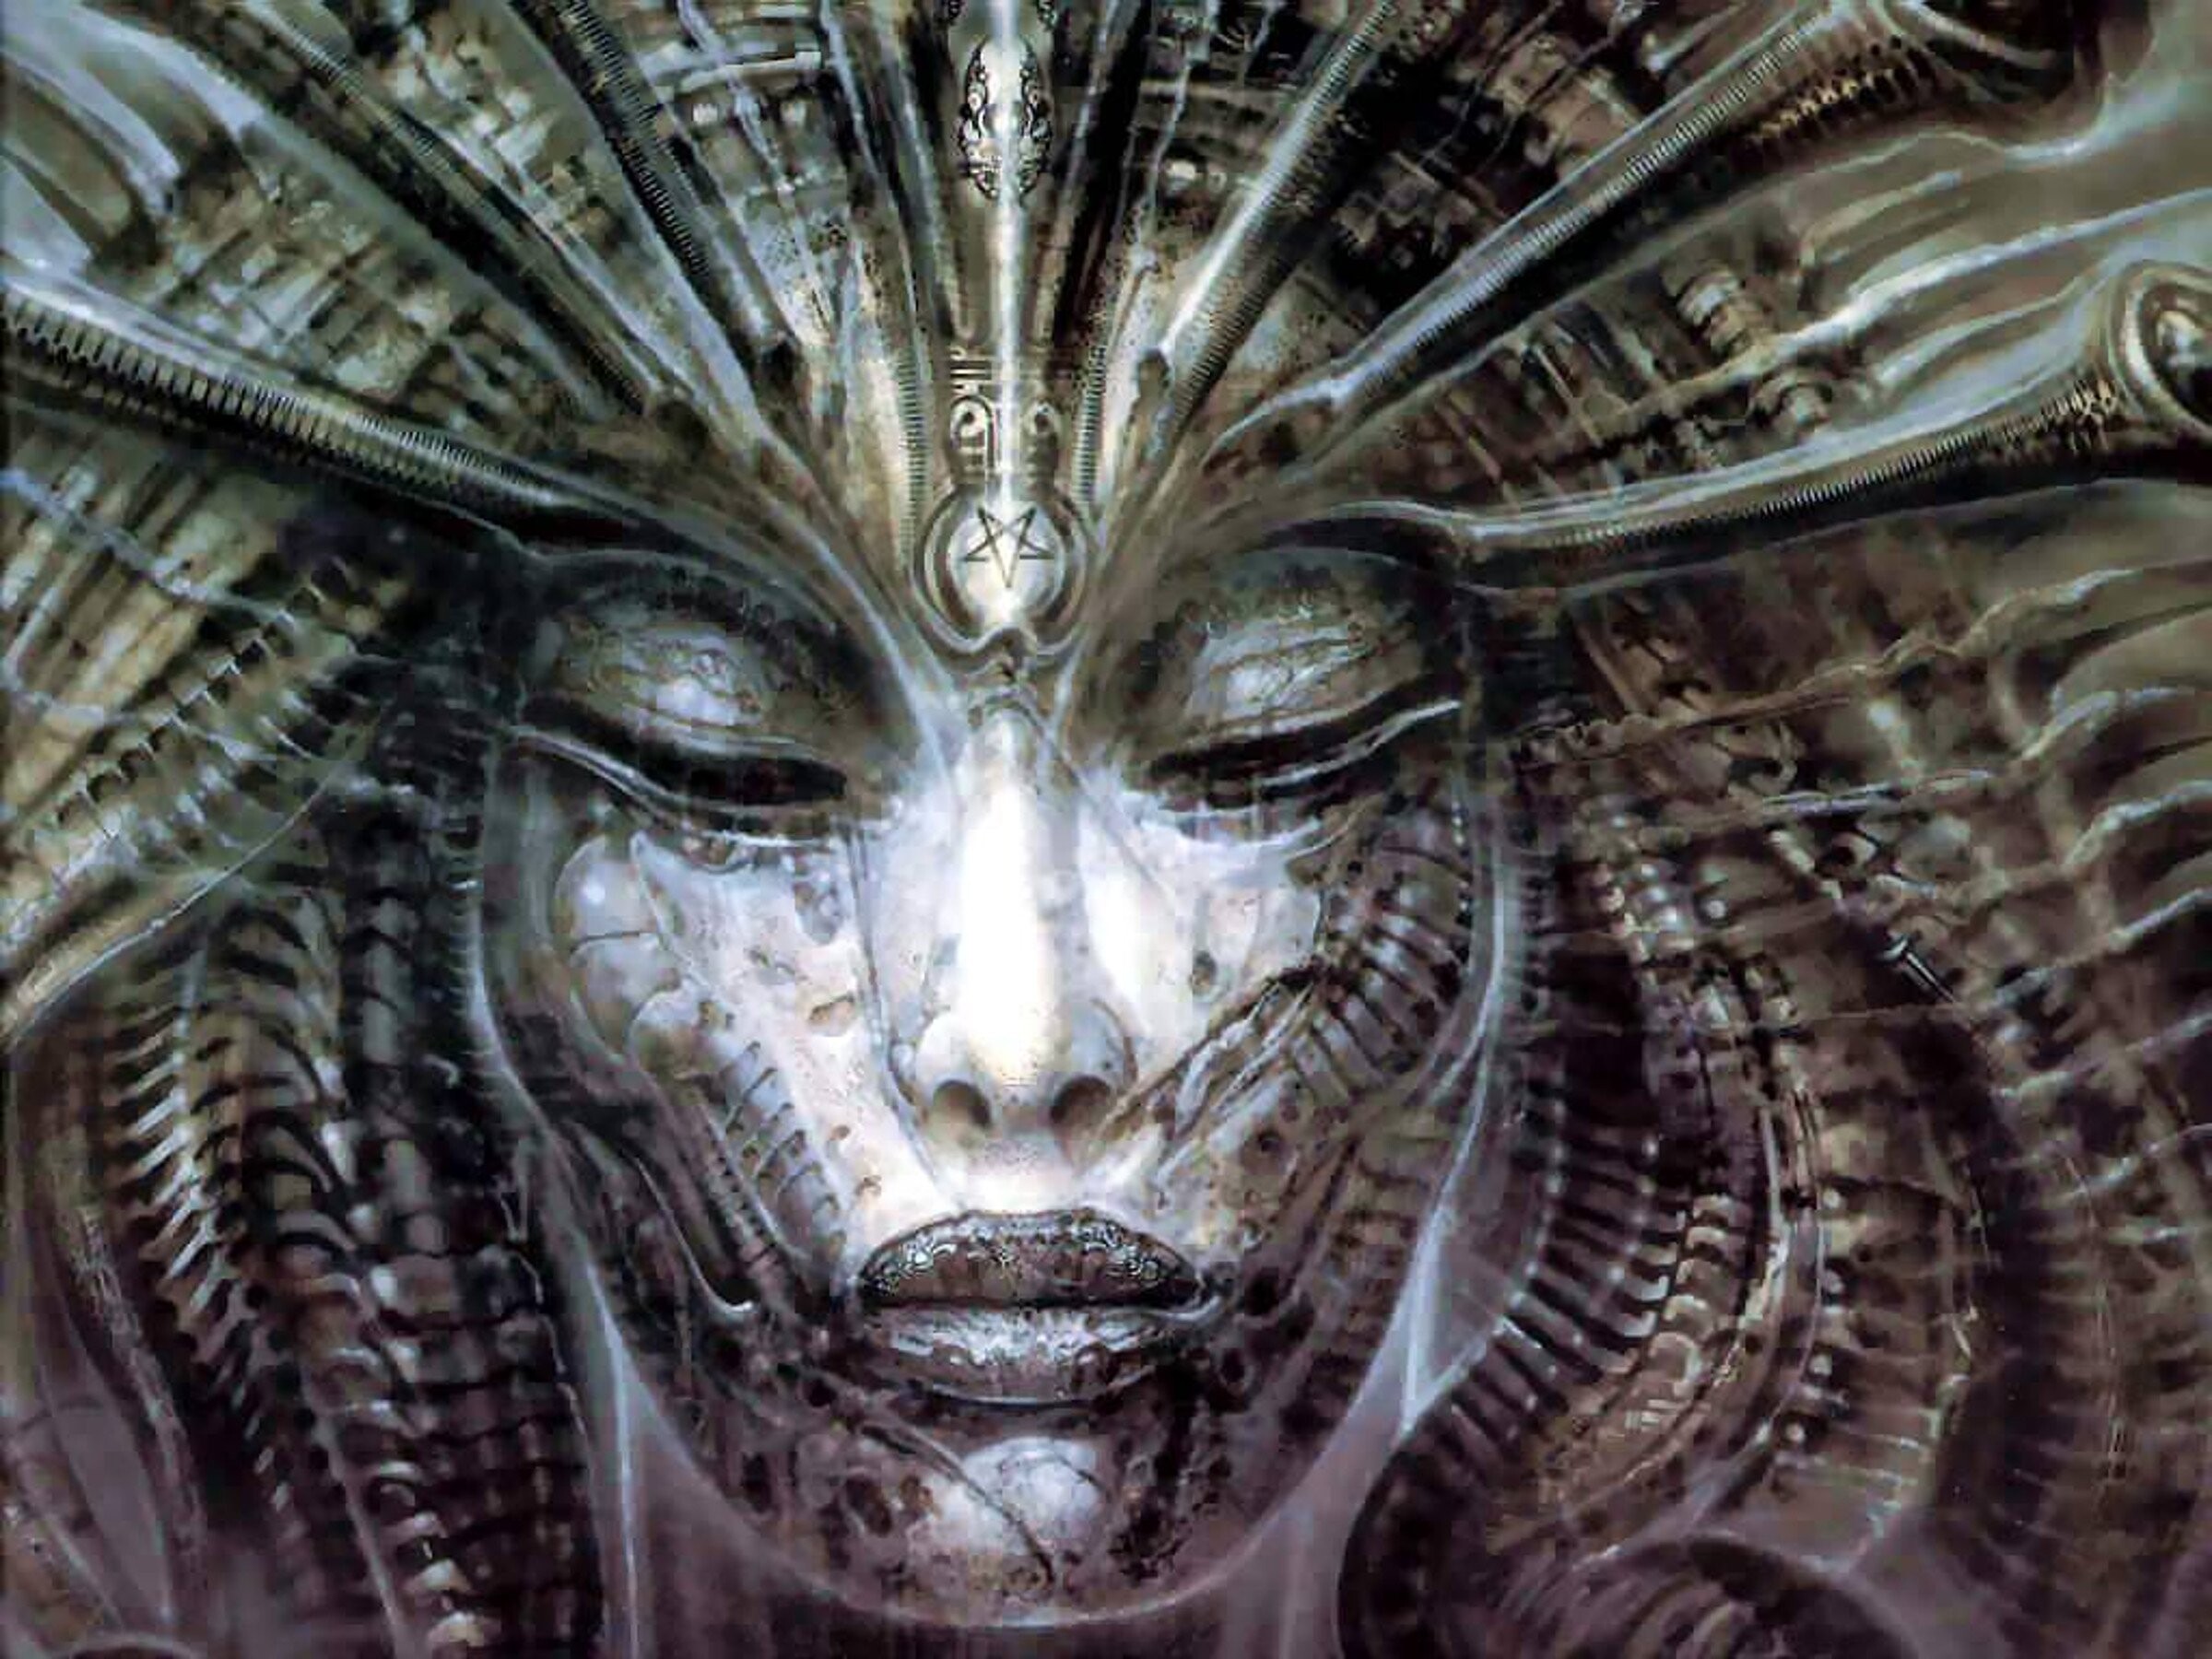 H.R. Giger: Biomechanical Art, Also Called Biomech, A Surrealistic Style Of Art That Combines Elements Of Machines With Organics. 2400x1800 HD Wallpaper.